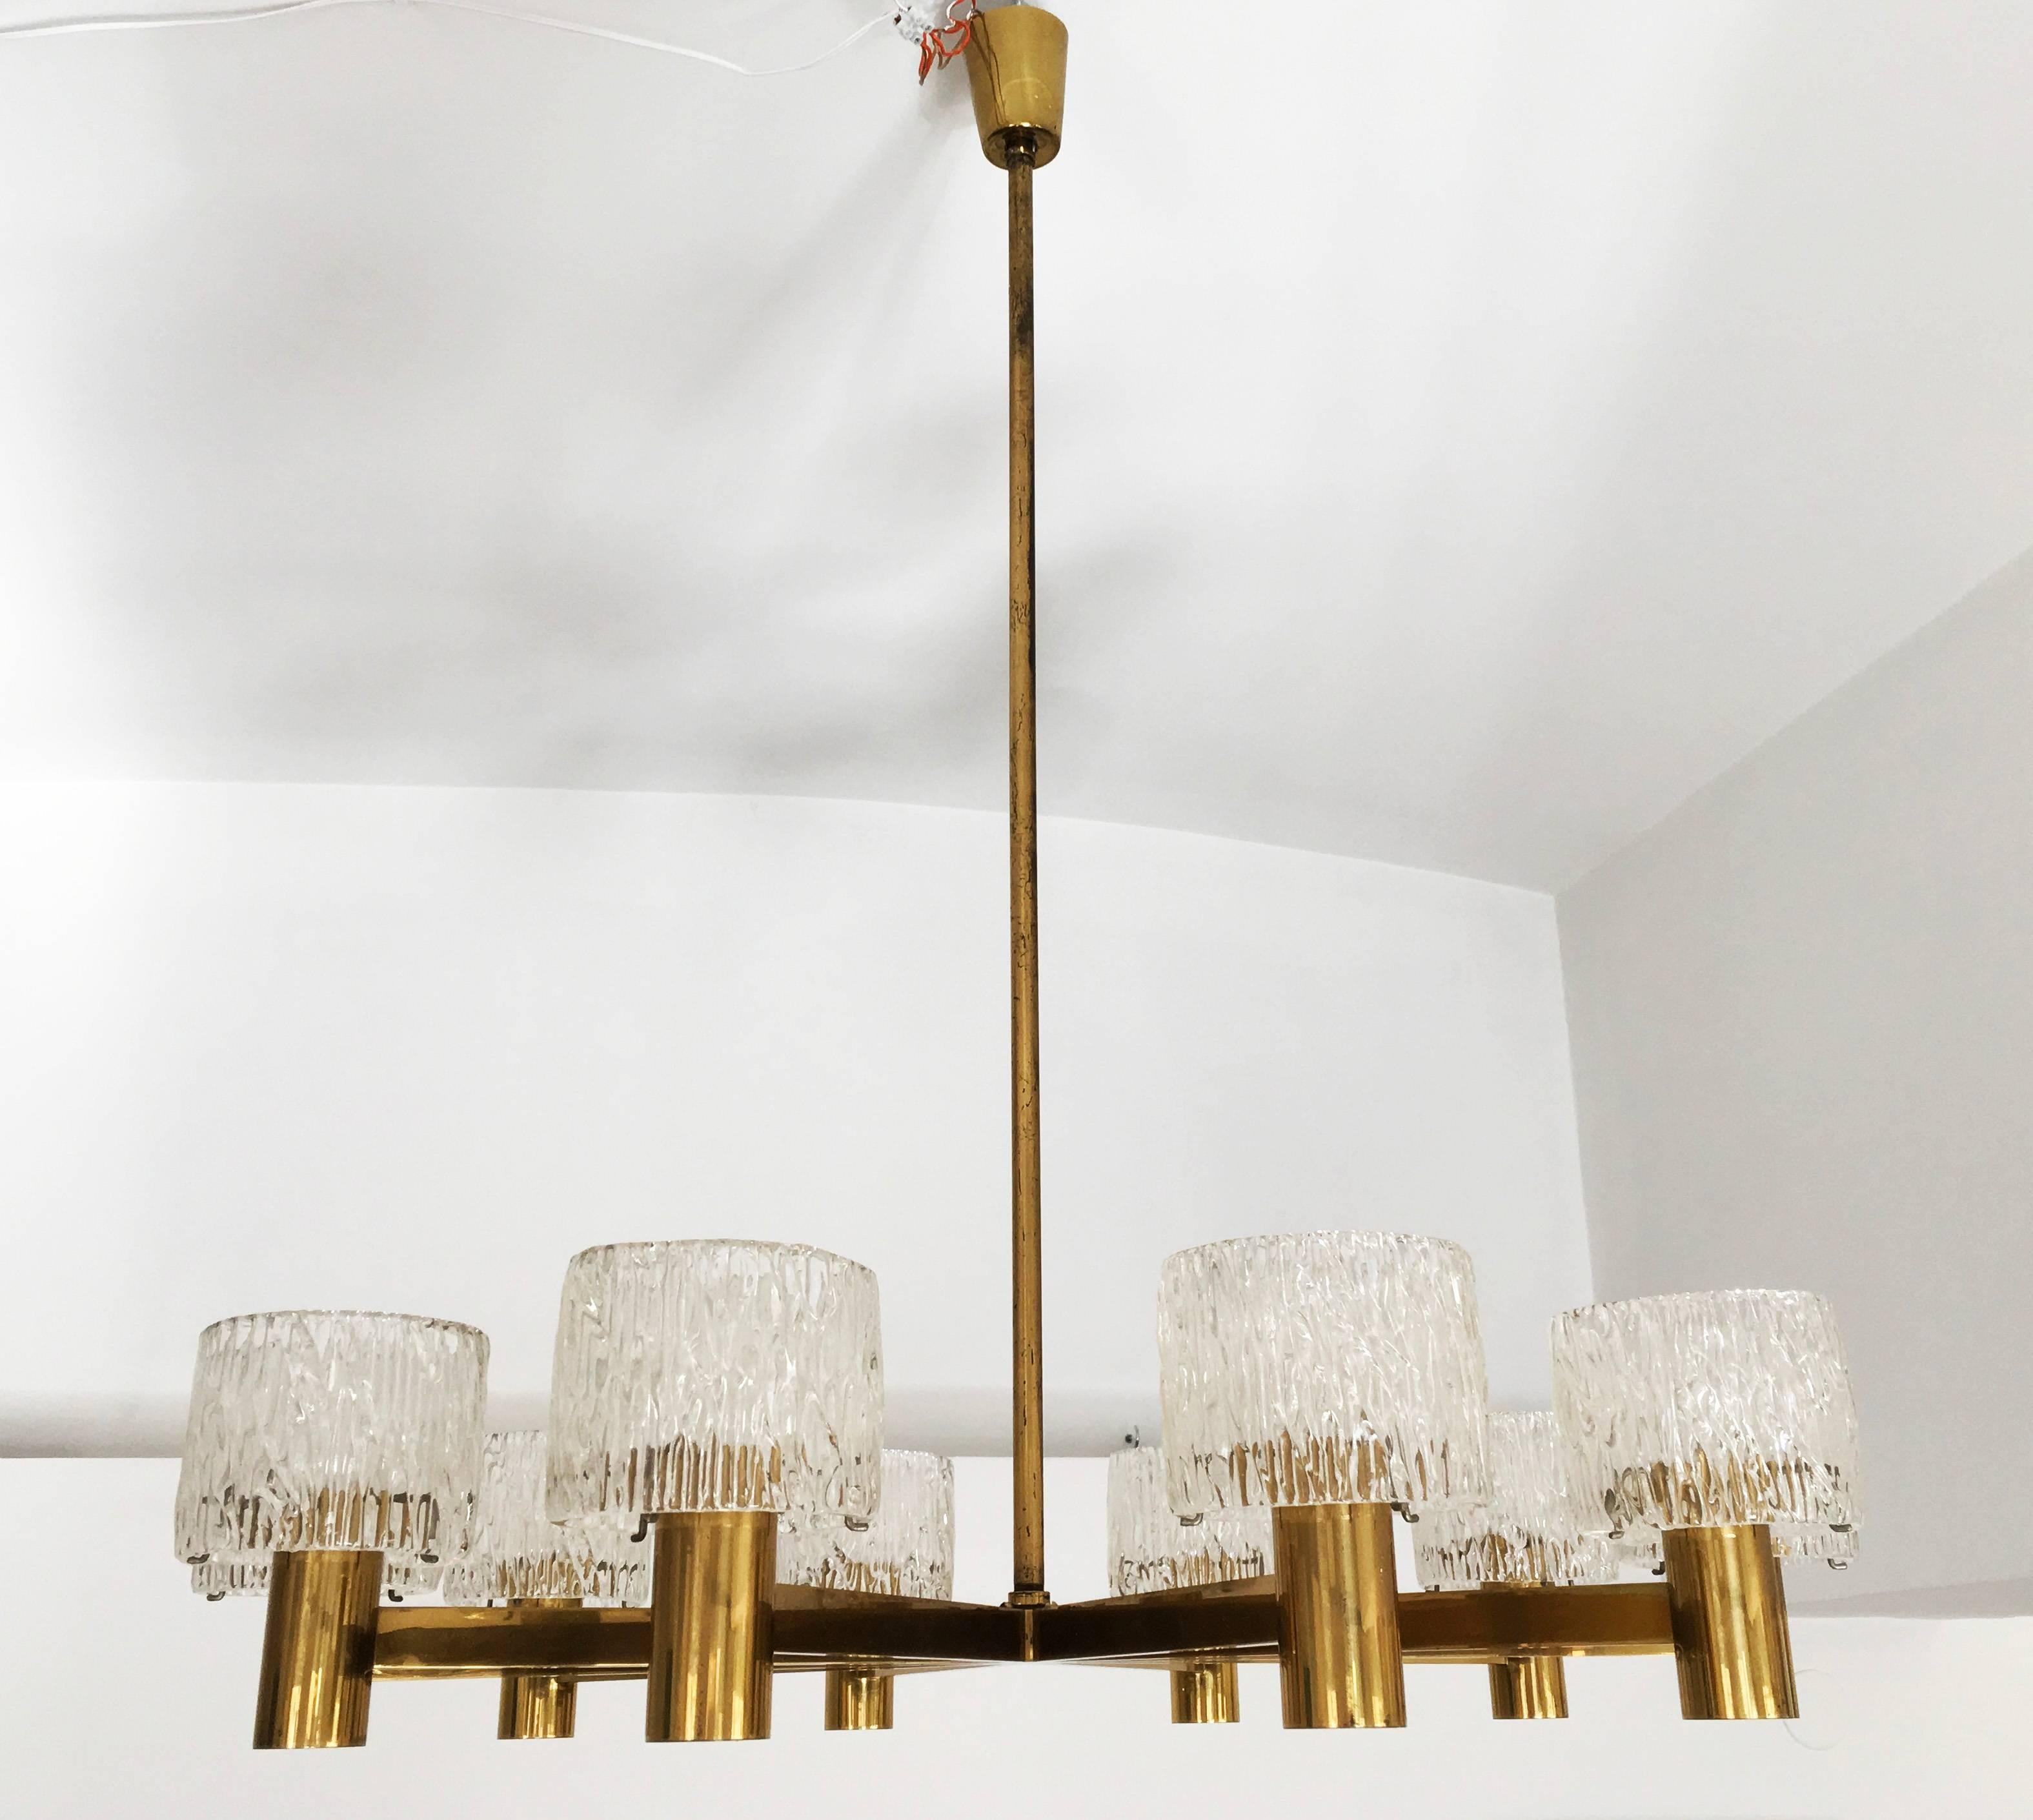 Brass construction and cast crystal designed in the 1960s by Carl Fagerlung for Orrefors Glass Swedish. Fitted with E27 socketes. Modern chandelier with ten arms supporting cylindrical, heavily textured glass shades. Fagerlund was known for these